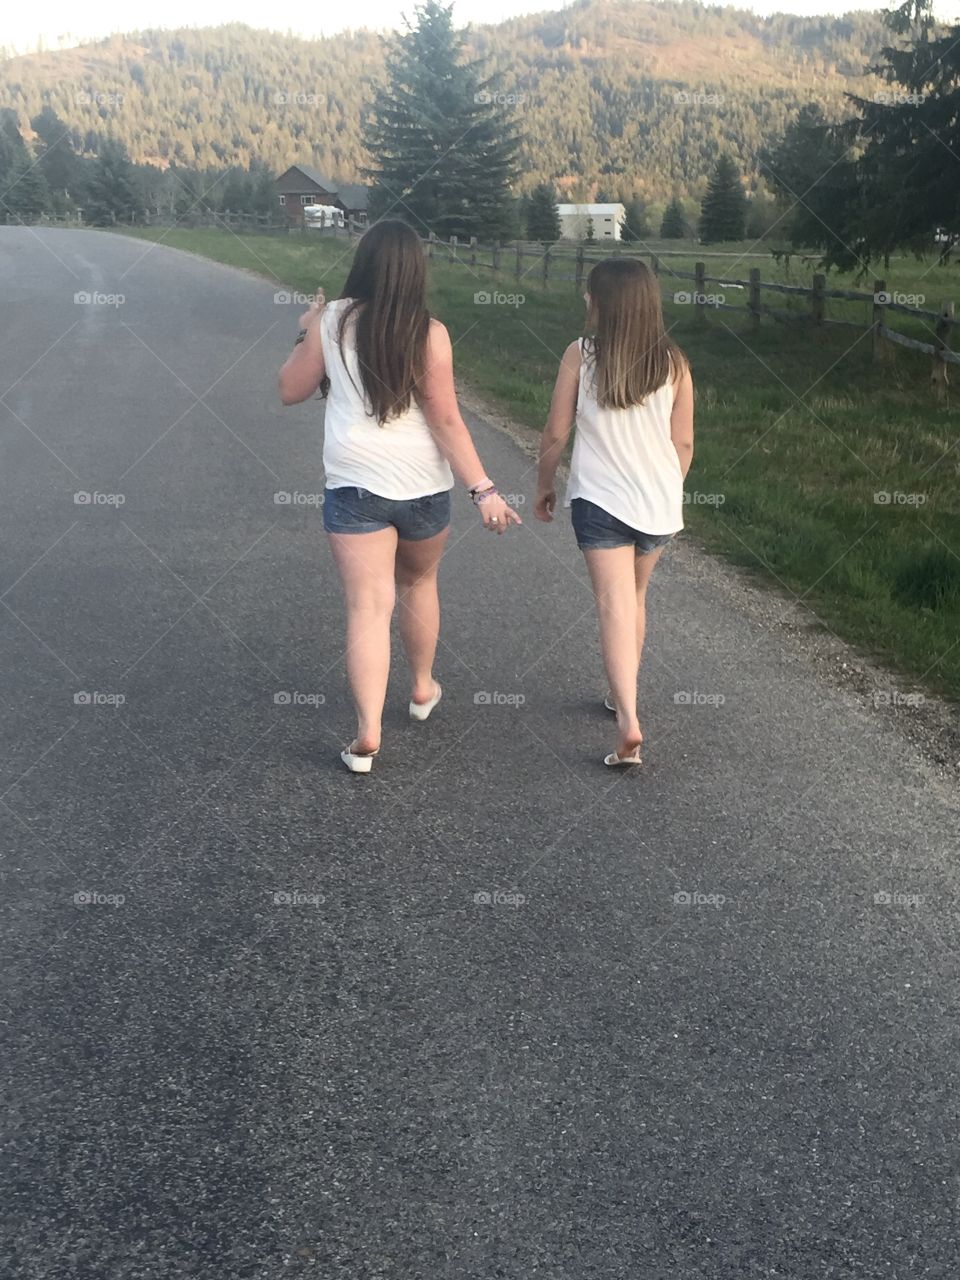 Girls Take a Peaceful Walk Down A Country Road 